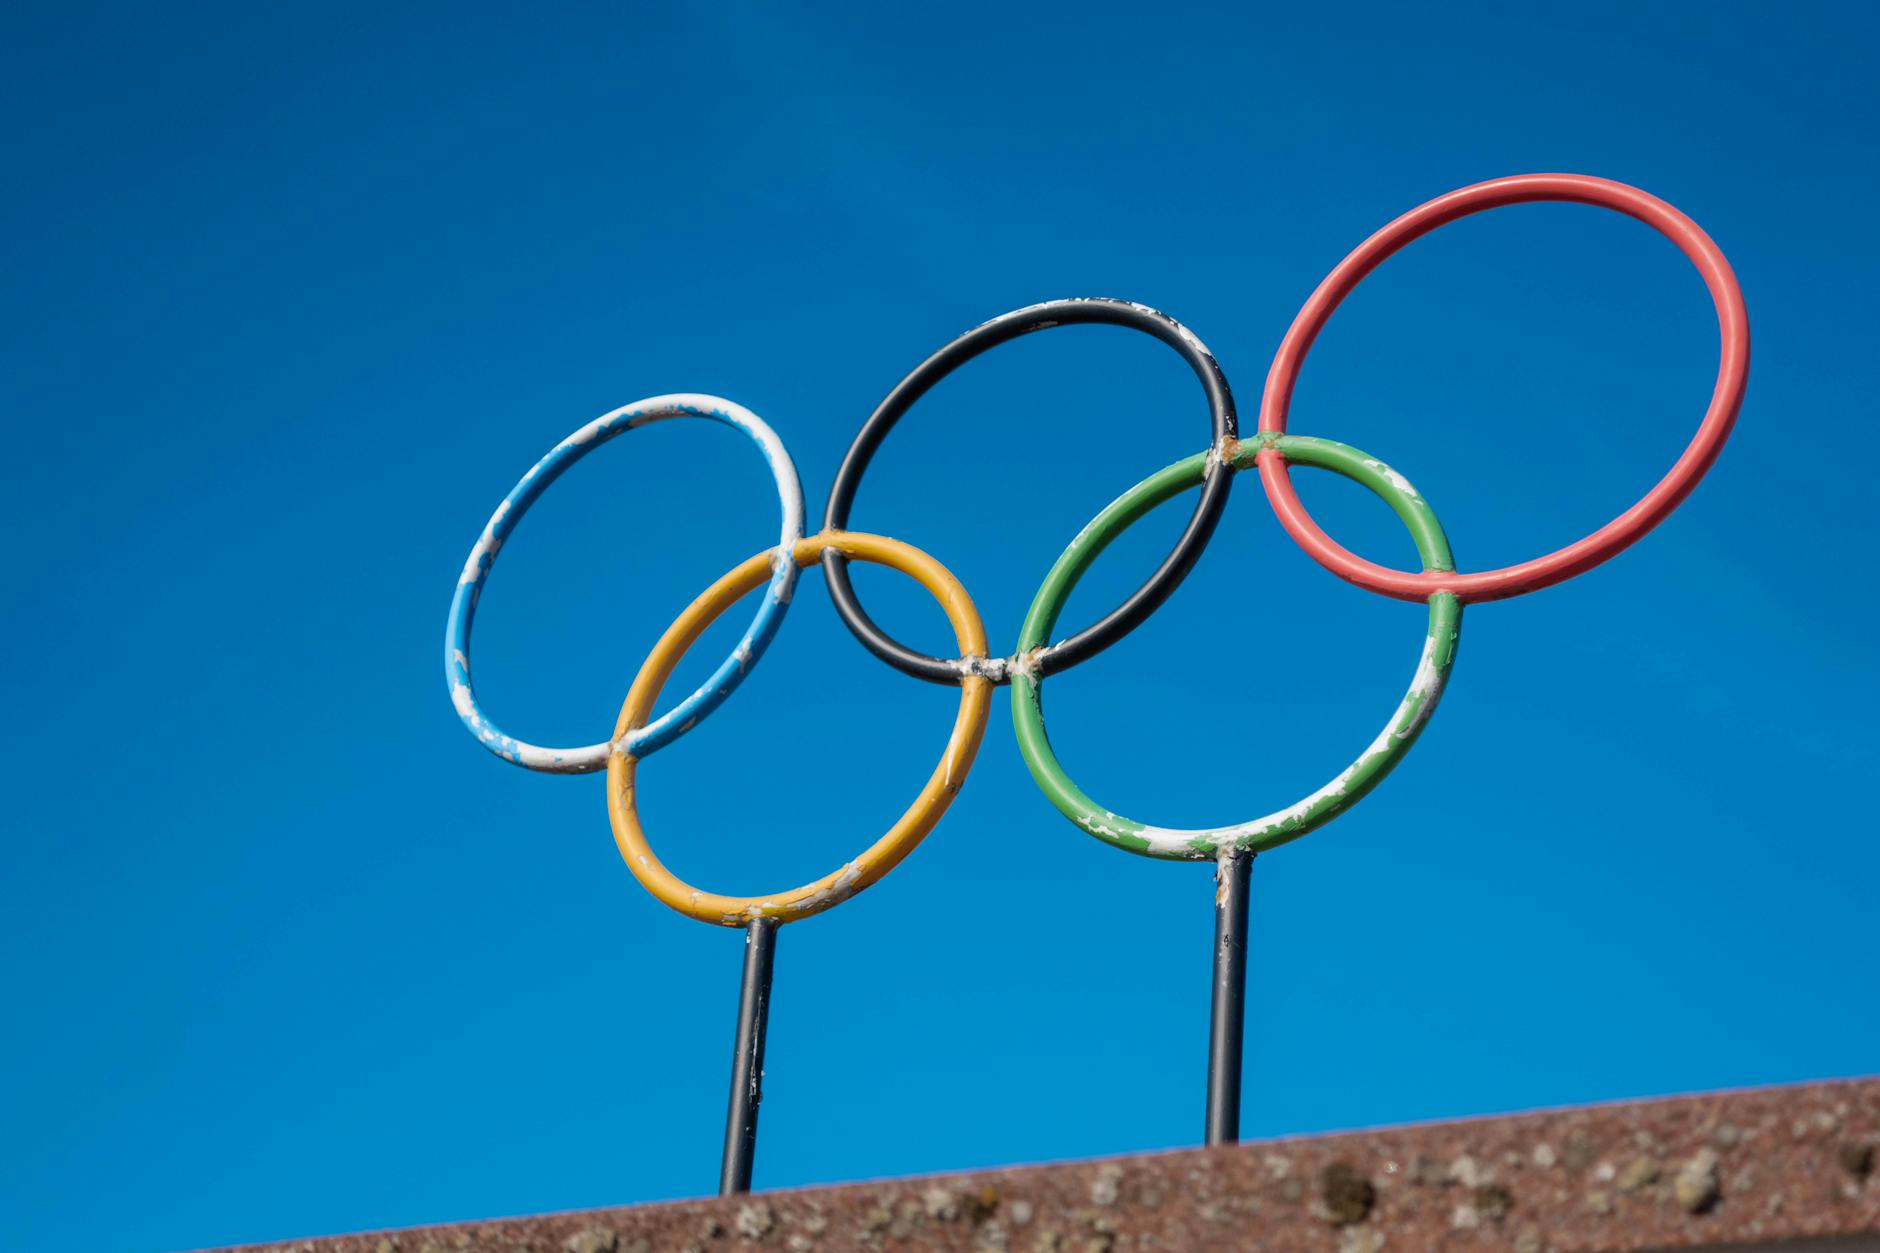 olympic rings against the background of clear blue sky